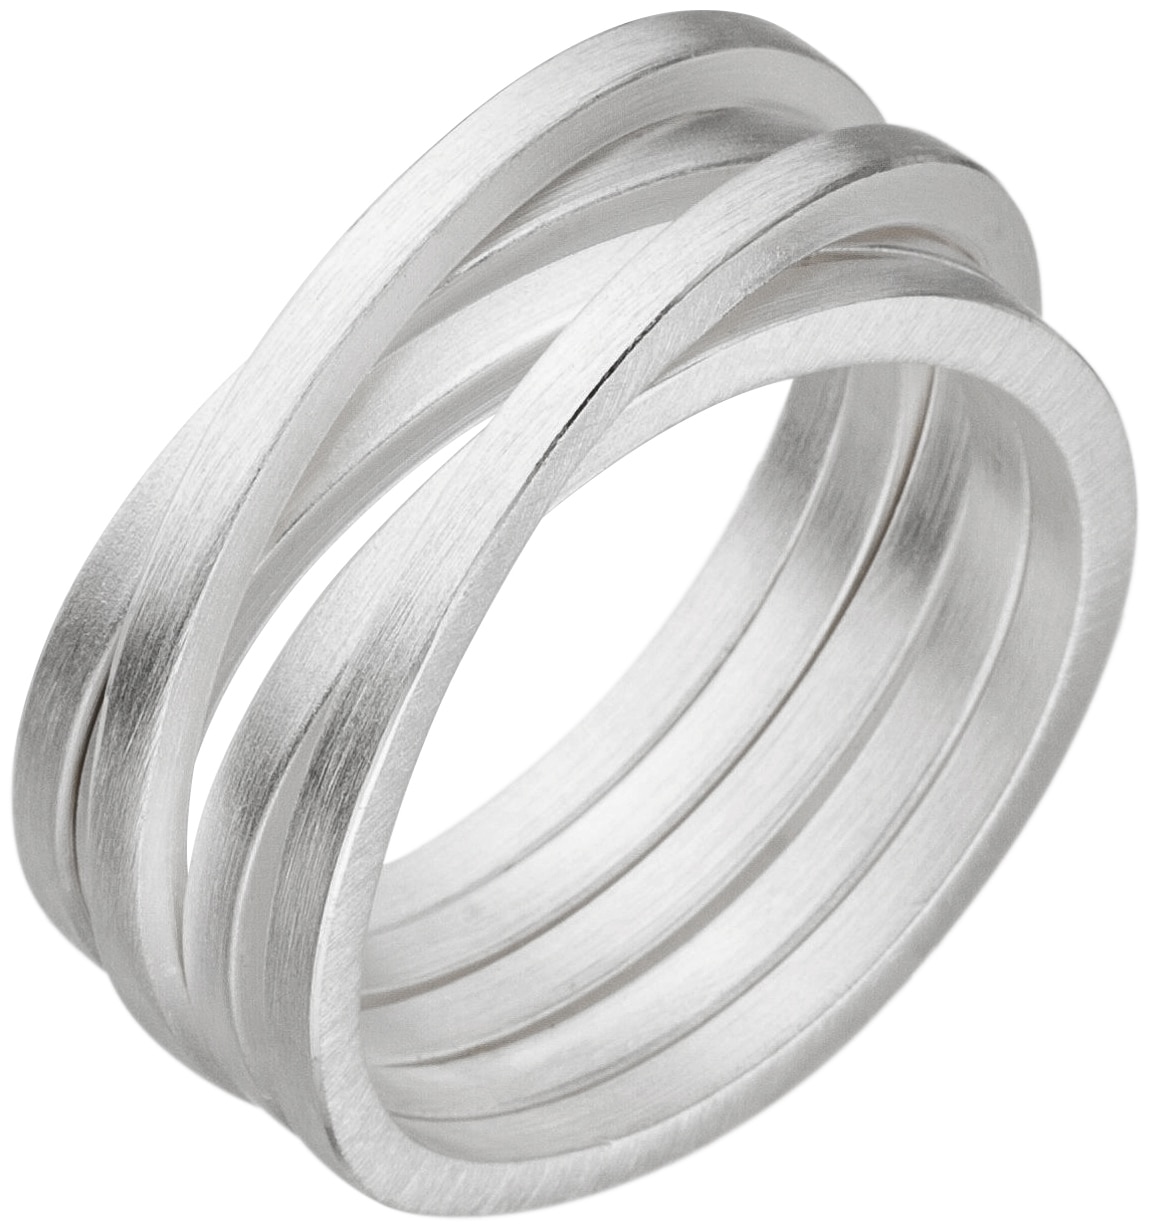 Sterling Silver Multi Row Satin Finished Ring